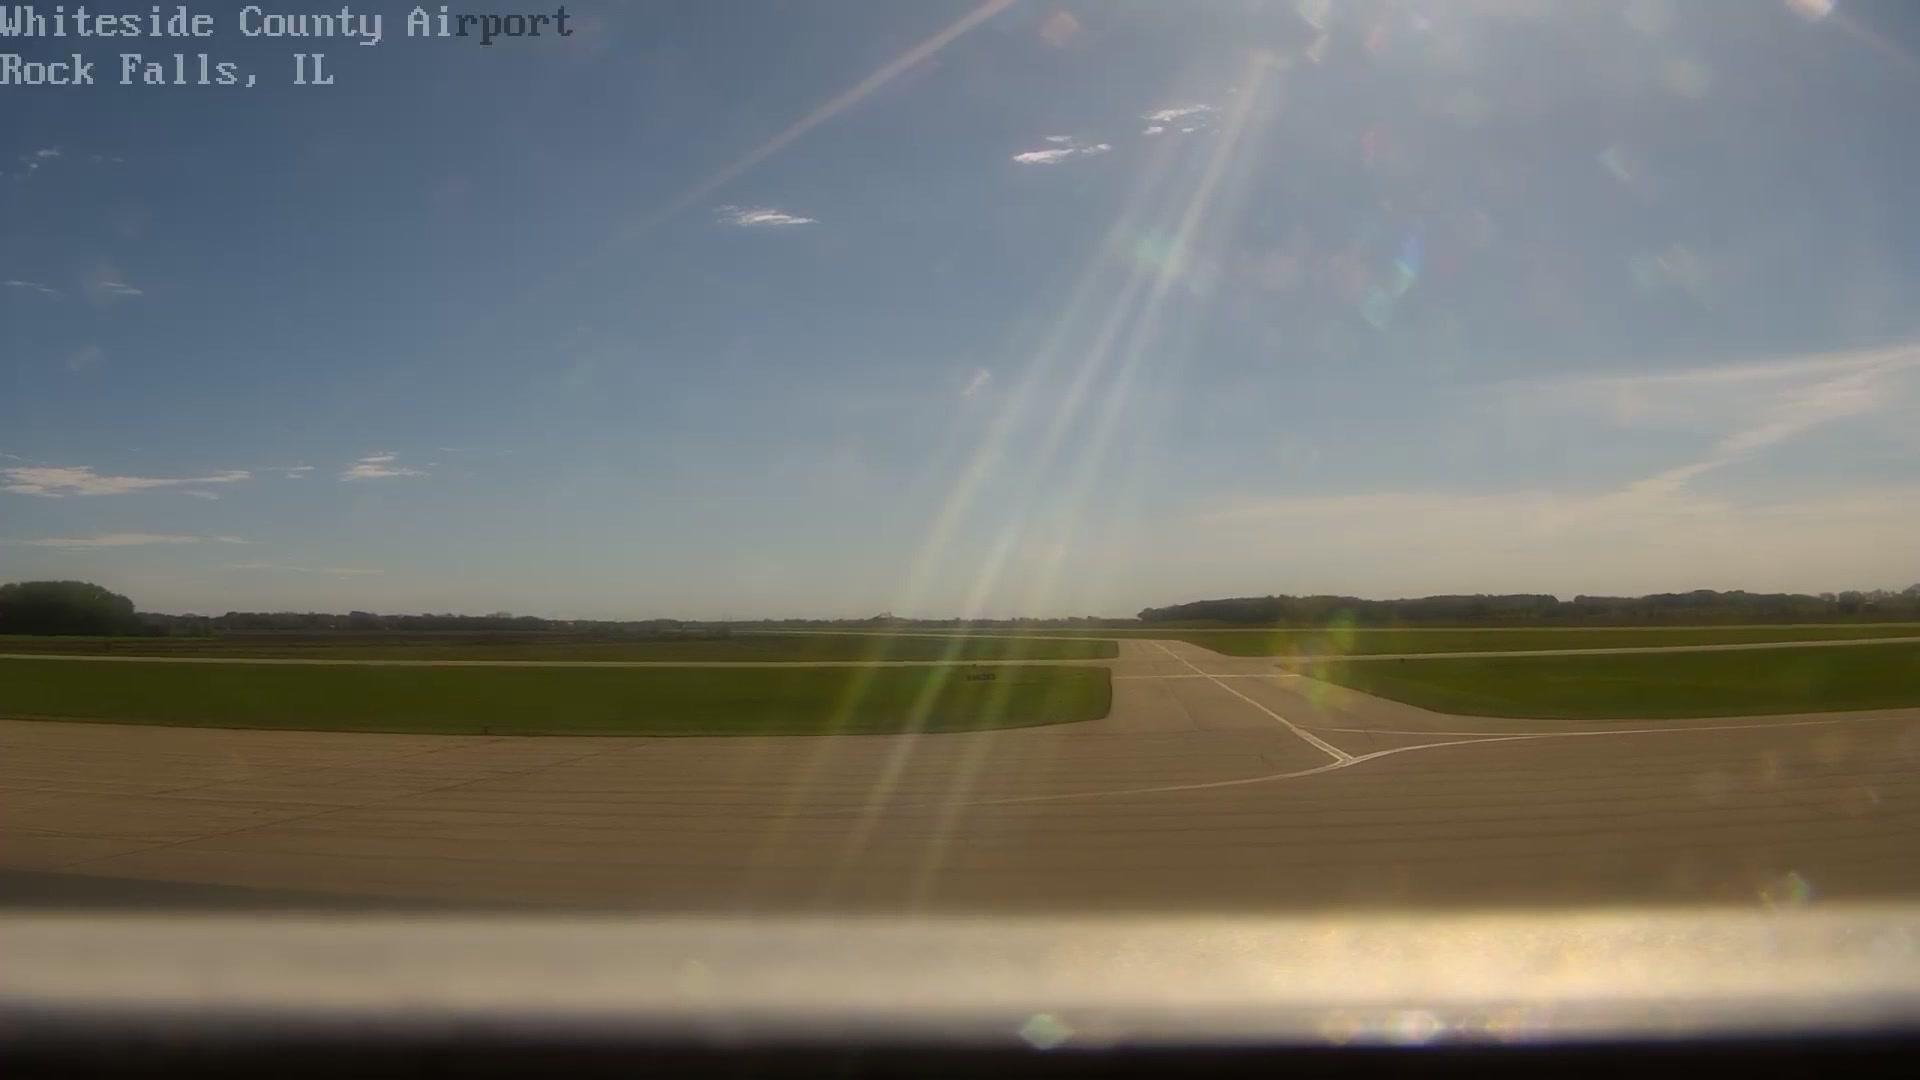 Traffic Cam Sterling: Whiteside County Airport - Rock Falls - Illinois Player